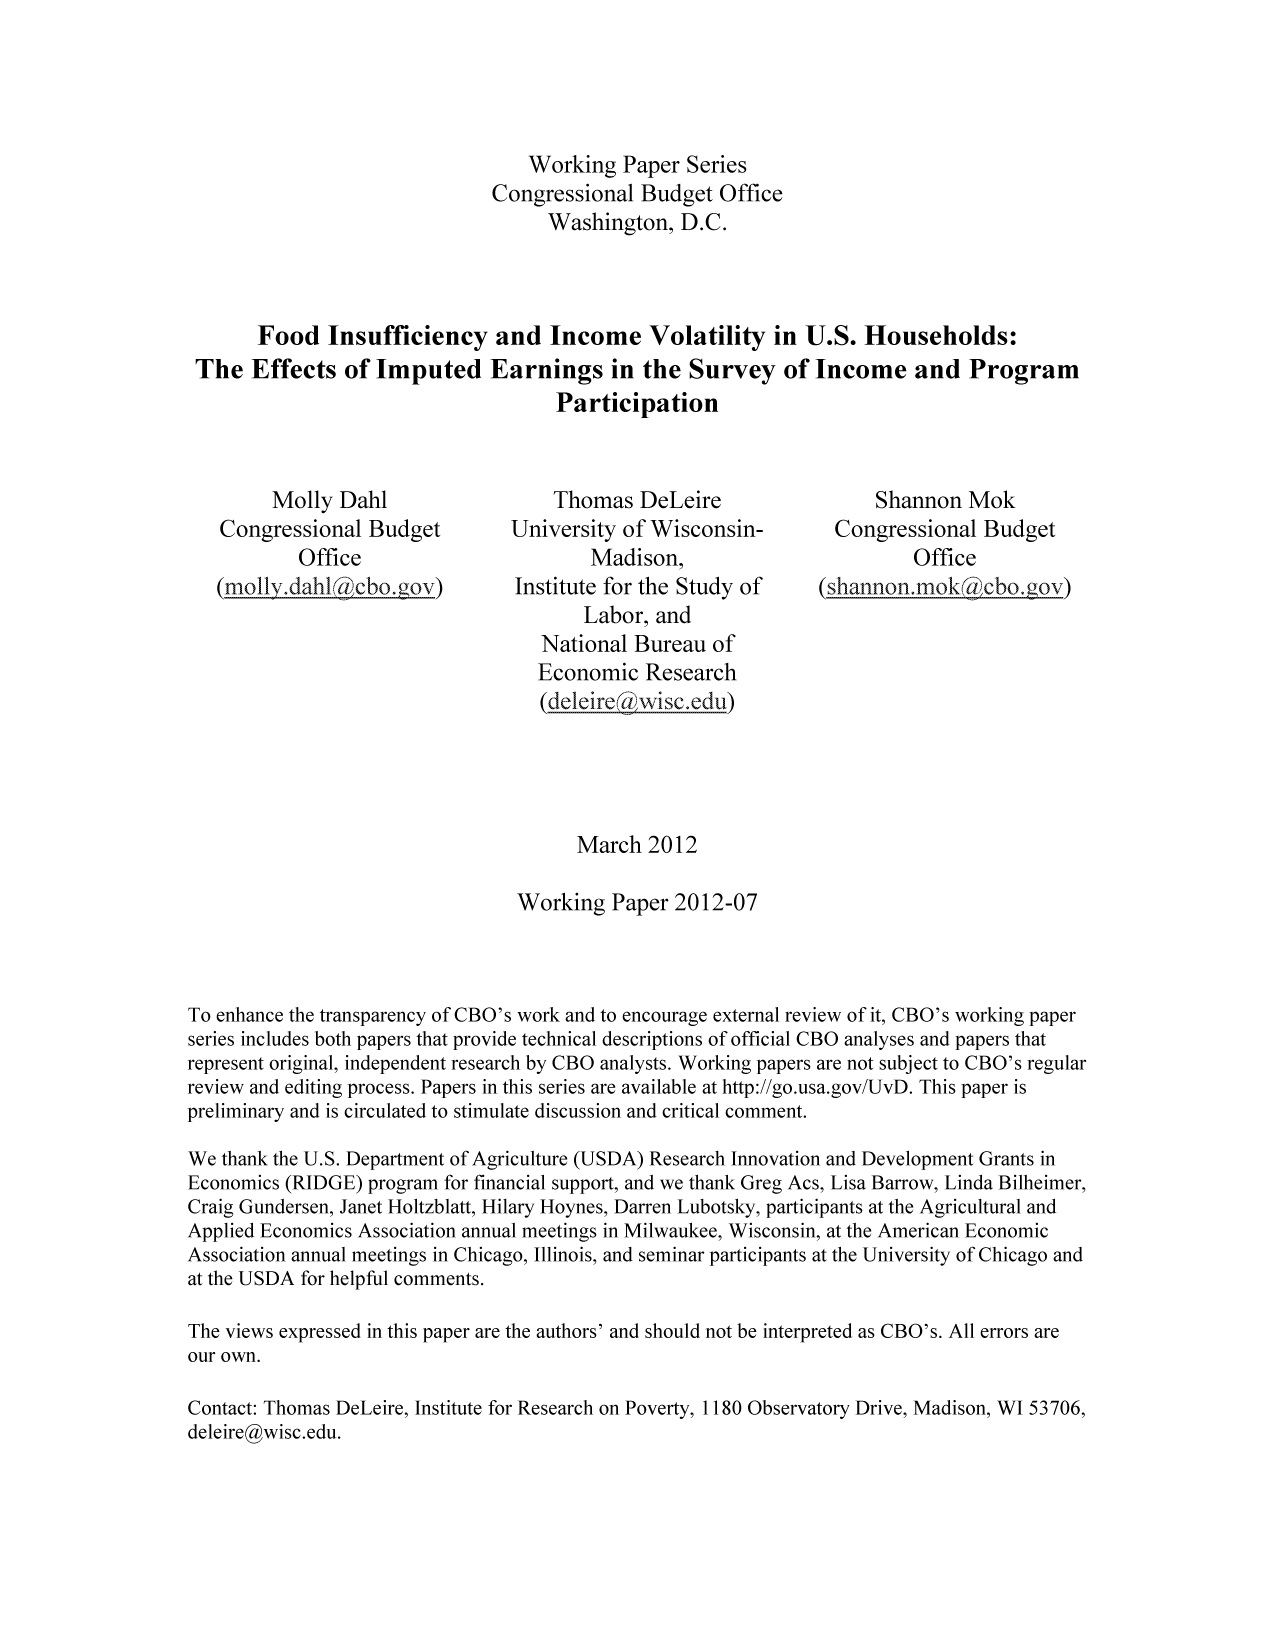 handle is hein.congrec/cbo10716 and id is 1 raw text is: Working Paper Series
Congressional Budget Office
Washington, D.C.
Food Insufficiency and Income Volatility in U.S. Households:
The Effects of Imputed Earnings in the Survey of Income and Program
Participation
Molly Dahi                   Thomas DeLeire                    Shannon Mok
Congressional Budget          University of Wisconsin-          Congressional Budget
Office                        Madison,                          Office
(molly.dahl      cbo. ov)      Institute for the Study of     (shanion.mok a ebo.gov)
Labor, and
National Bureau of
Economic Research
(deleirewwisc.edu)
March 2012
Working Paper 2012-07
To enhance the transparency of CBO's work and to encourage external review of it, CBO's working paper
series includes both papers that provide technical descriptions of official CBO analyses and papers that
represent original, independent research by CBO analysts. Working papers are not subject to CBO's regular
review and editing process. Papers in this series are available at http://go.usa.gov/UvD. This paper is
preliminary and is circulated to stimulate discussion and critical comment.
We thank the U.S. Department of Agriculture (USDA) Research Innovation and Development Grants in
Economics (RIDGE) program for financial support, and we thank Greg Acs, Lisa Barrow, Linda Bilheimer,
Craig Gundersen, Janet Holtzblatt, Hilary Hoynes, Darren Lubotsky, participants at the Agricultural and
Applied Economics Association annual meetings in Milwaukee, Wisconsin, at the American Economic
Association annual meetings in Chicago, Illinois, and seminar participants at the University of Chicago and
at the USDA for helpful comments.
The views expressed in this paper are the authors' and should not be interpreted as CBO's. All errors are
our own.
Contact: Thomas DeLeire, Institute for Research on Poverty, 1180 Observatory Drive, Madison, WI 53706,
deleire@wisc.edu.


